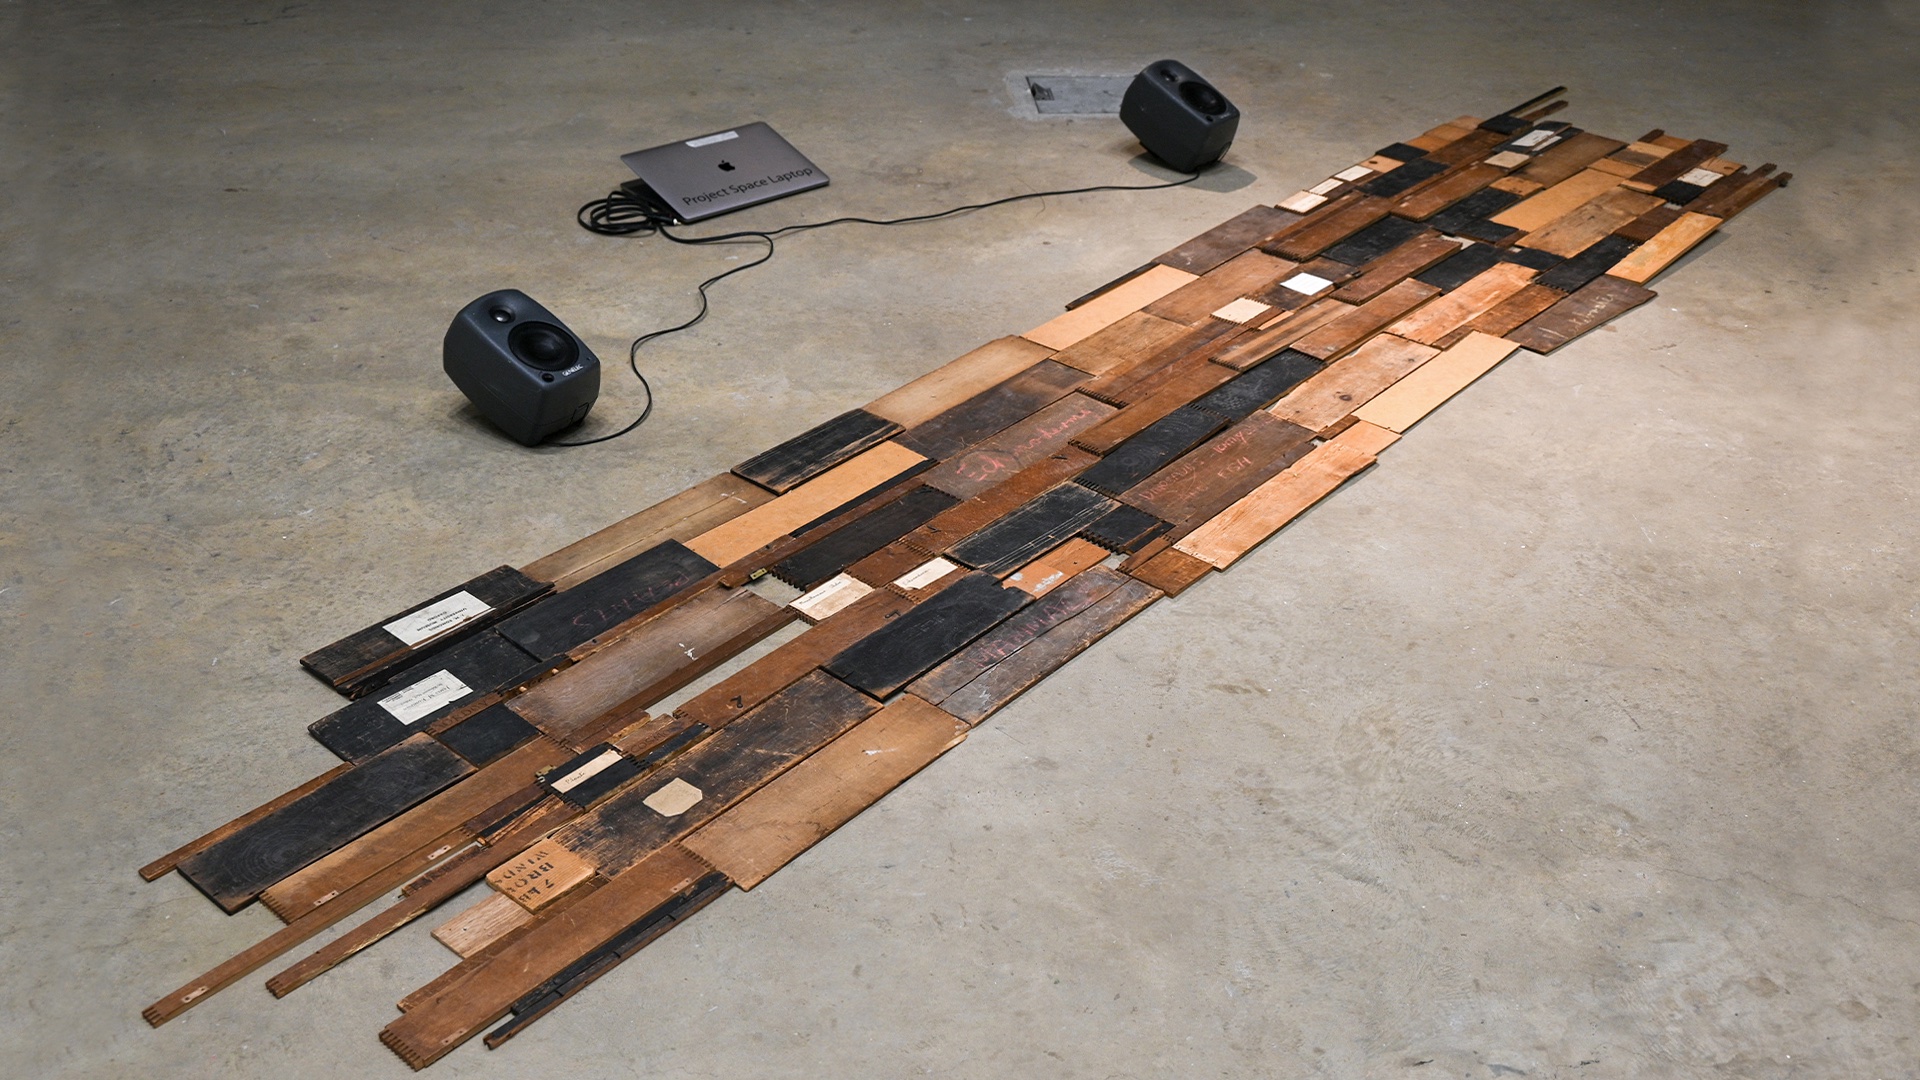 An installation of multiple wooden planks dismantled from lantern slide boxes and arranged on the ground with two Genelec speakers on one side.